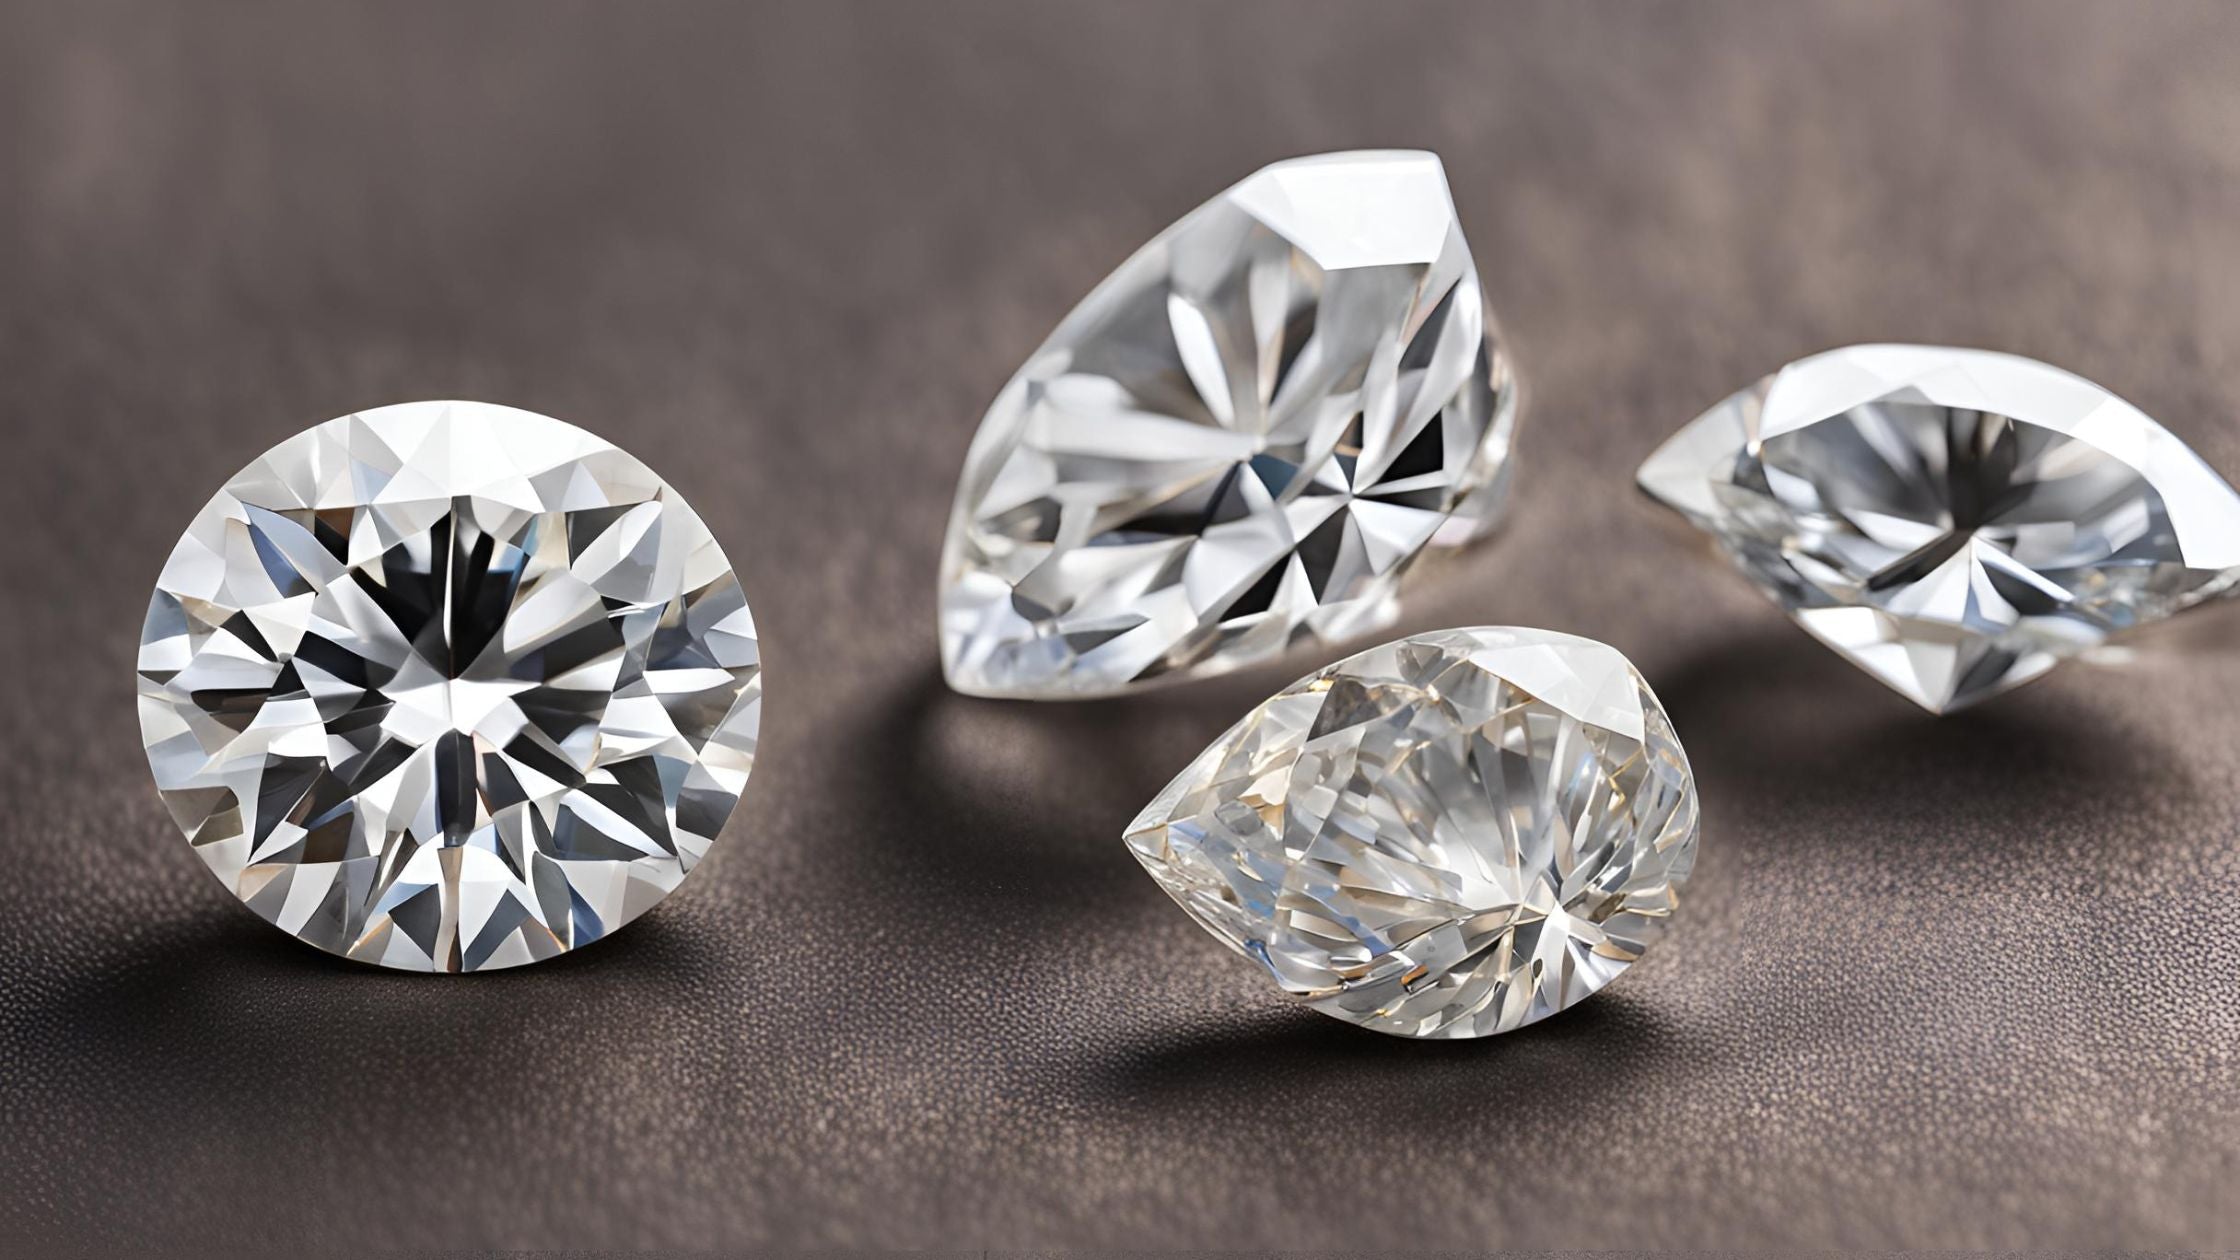 MOISSANITE vs LAB DIAMONDS: WHICH IS BETTER?